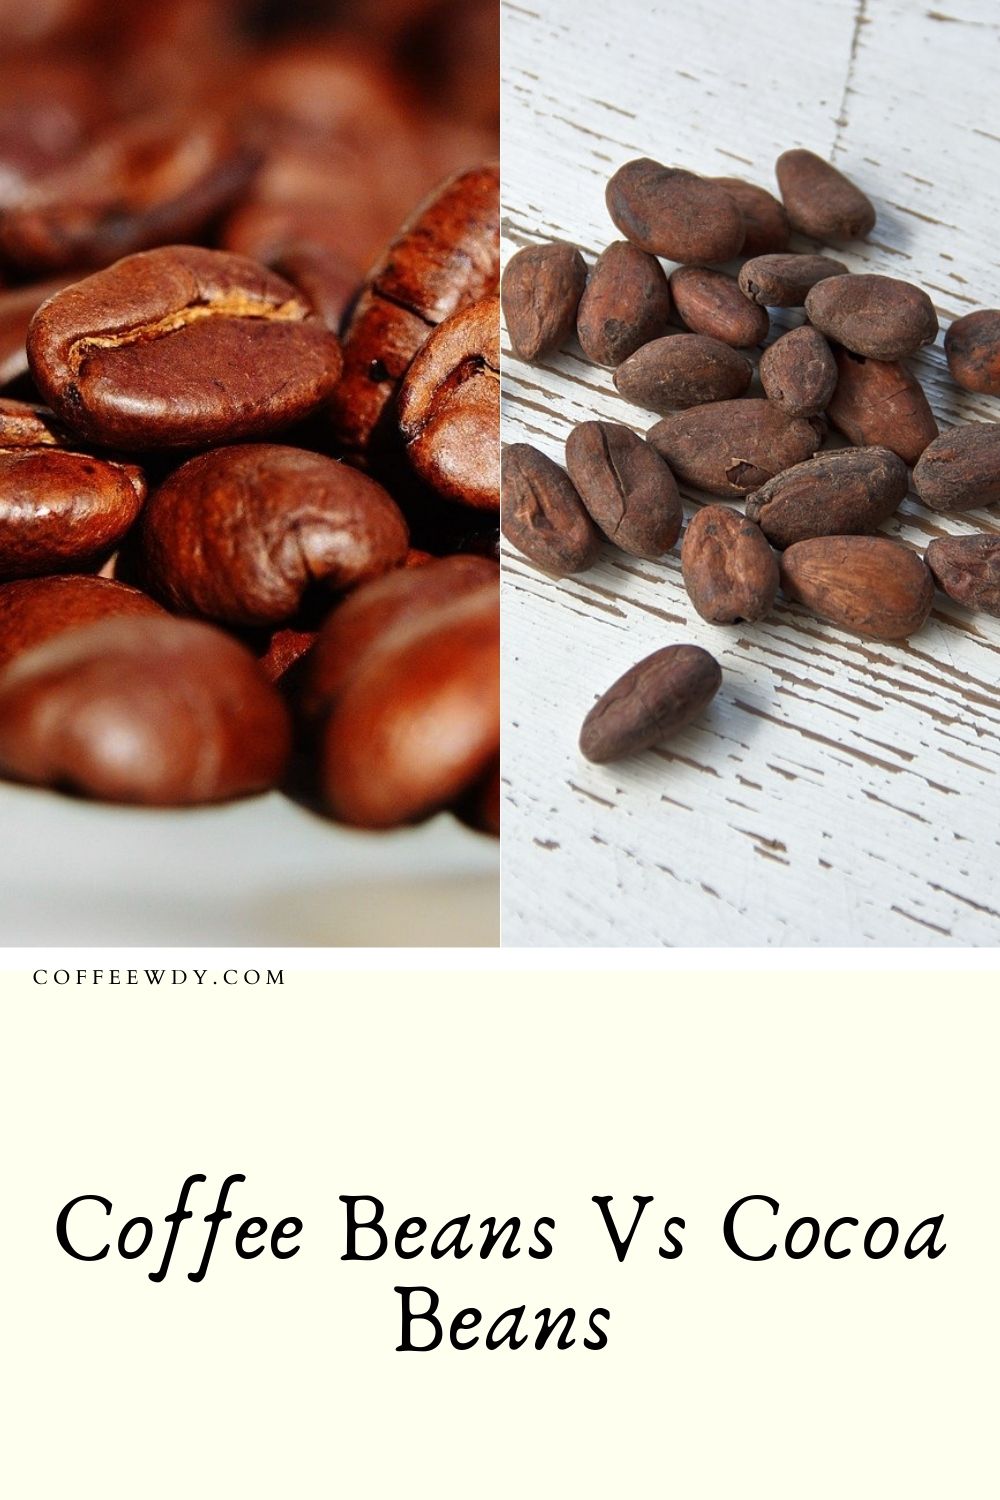 cocoa beans Is Crucial To Your Business. Learn Why!